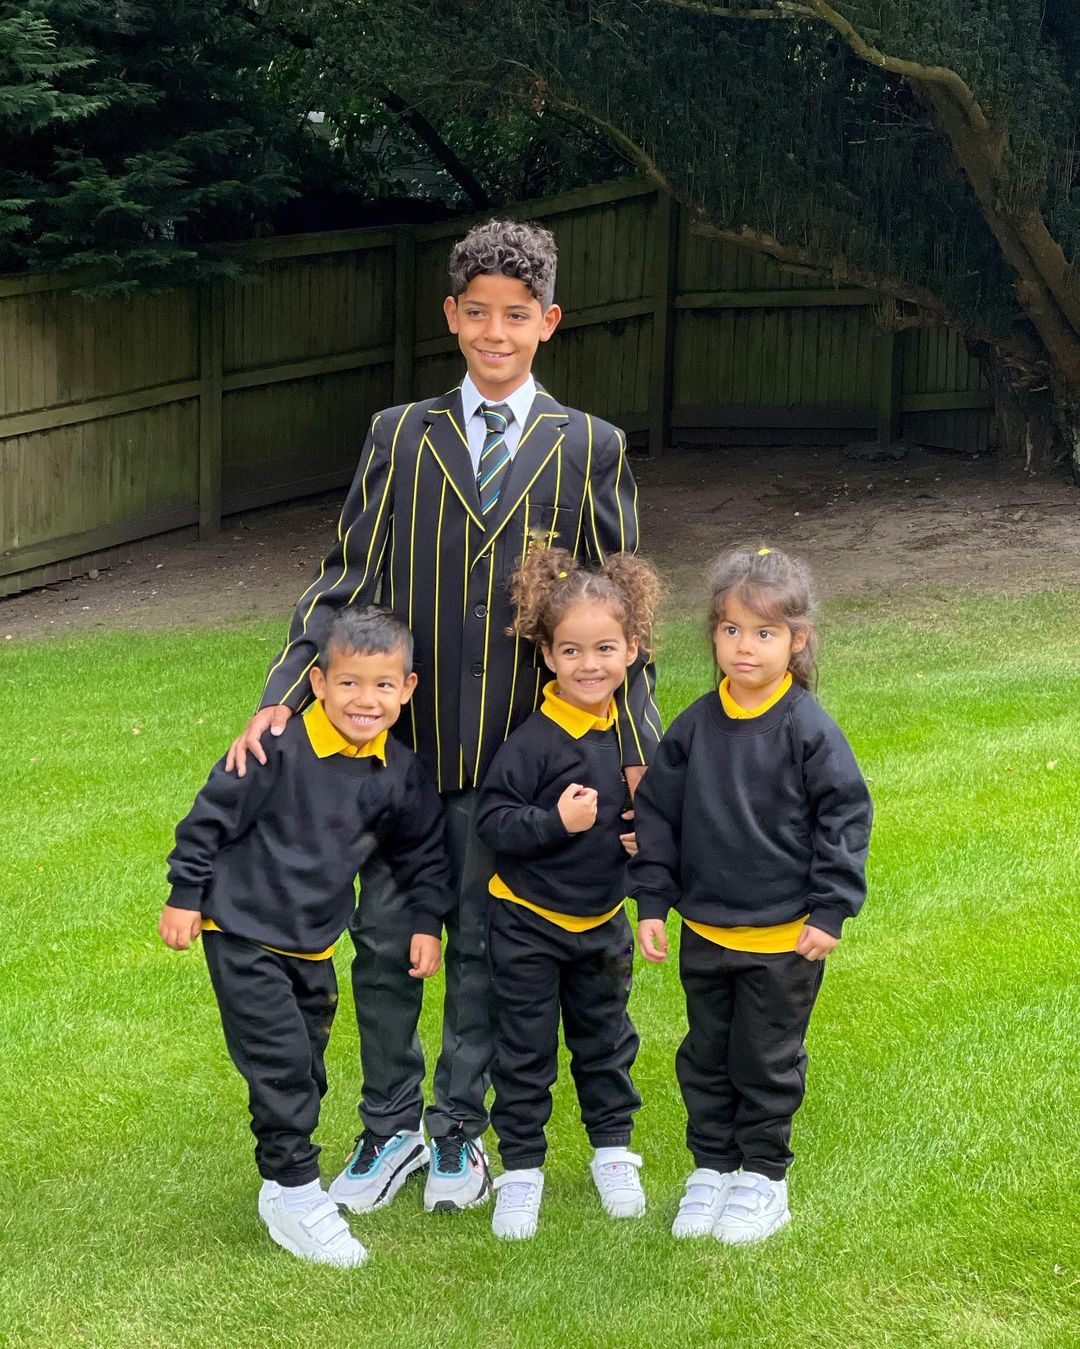 Ronaldo's children on the first day of school